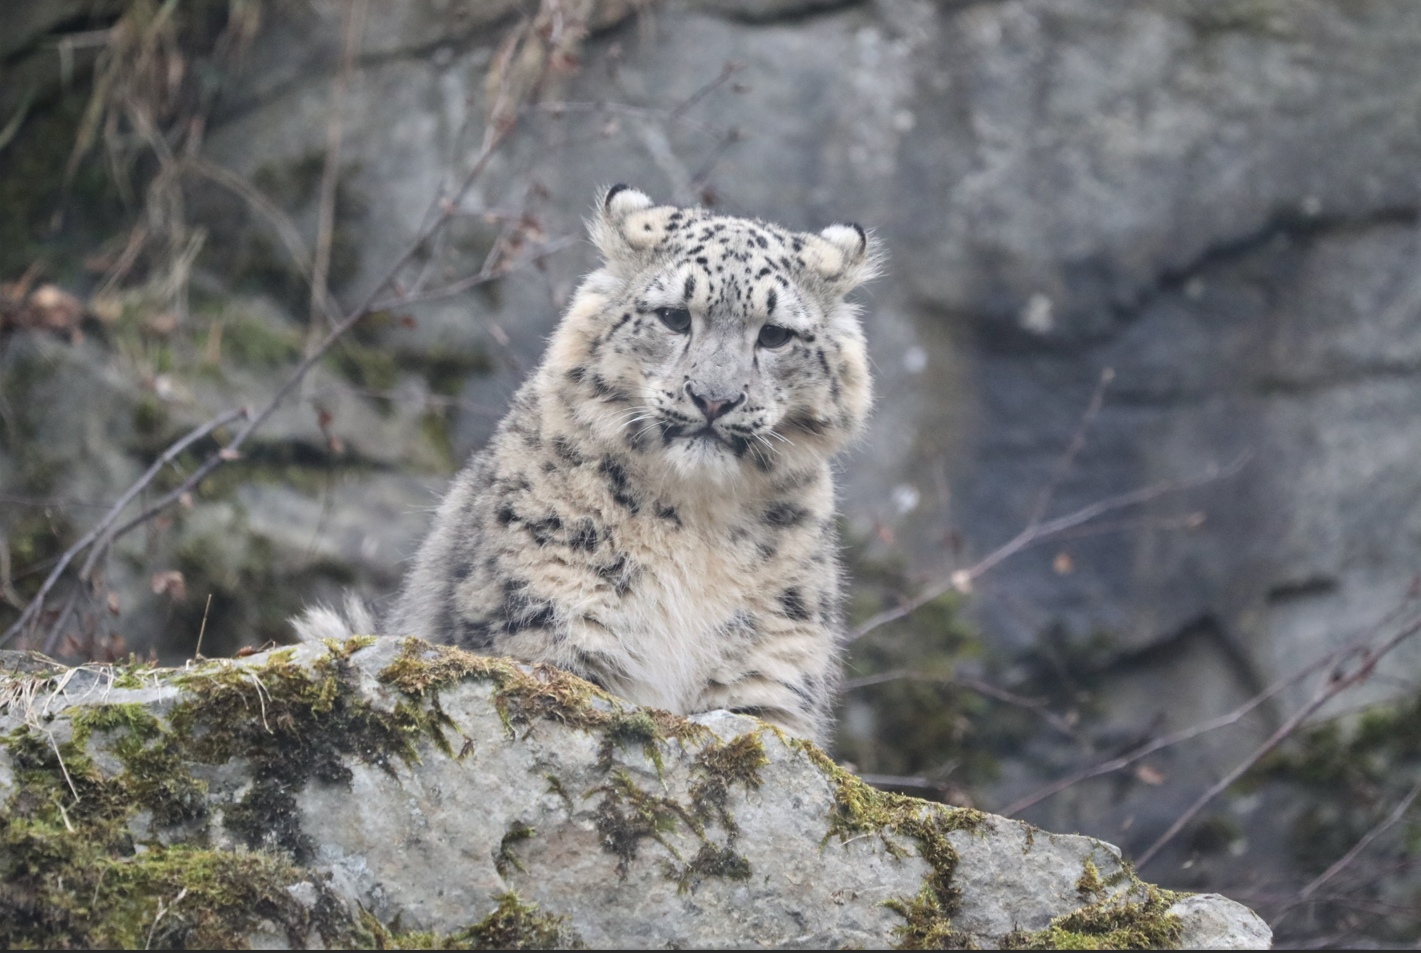 Snow leopard cub sitting on rocky outcrop looking down toward camera

Image: AMY MIDDLETON 2023